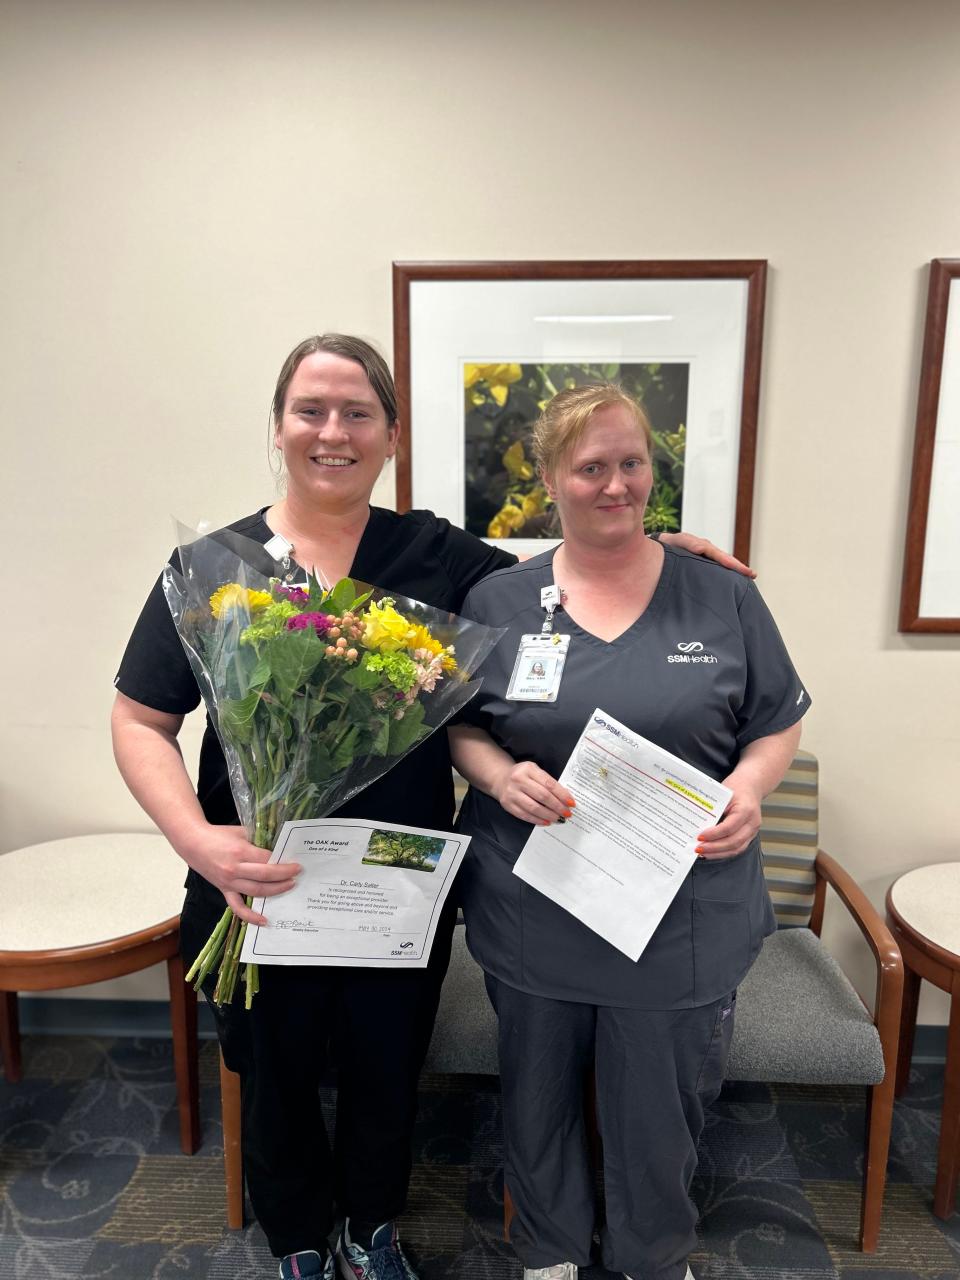 Dr. Carly Salter, left, was recently recognized with an OAK Award by SSM Health following nominations from two patients. Her nurse, Mary Sorrell, right, also was mentioned.